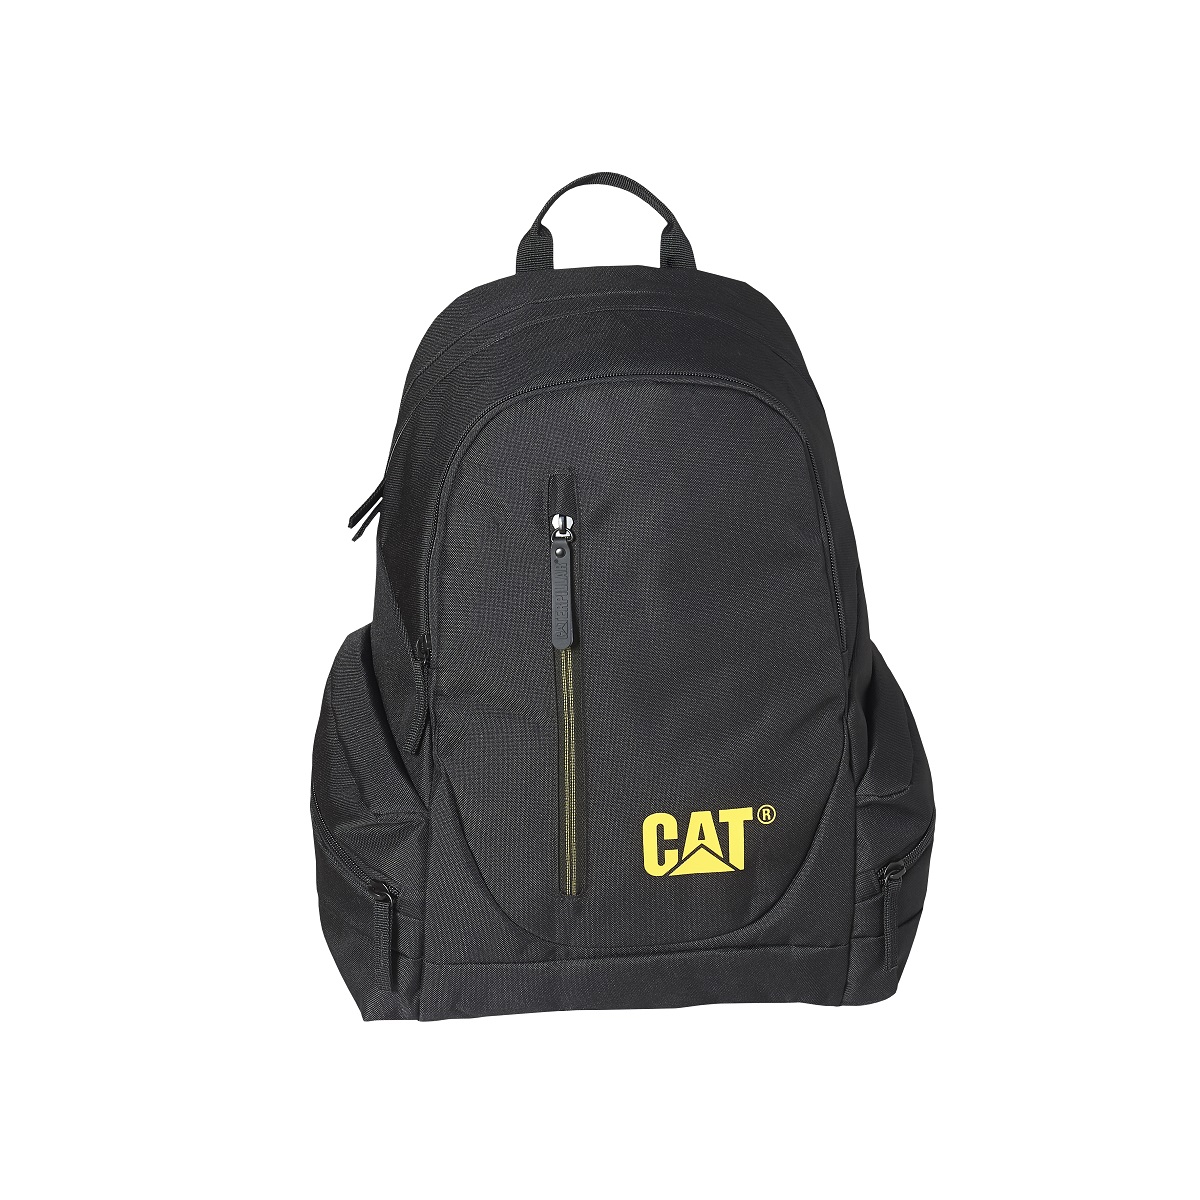 CAT -  The Project Backpack - Black (83541-01)